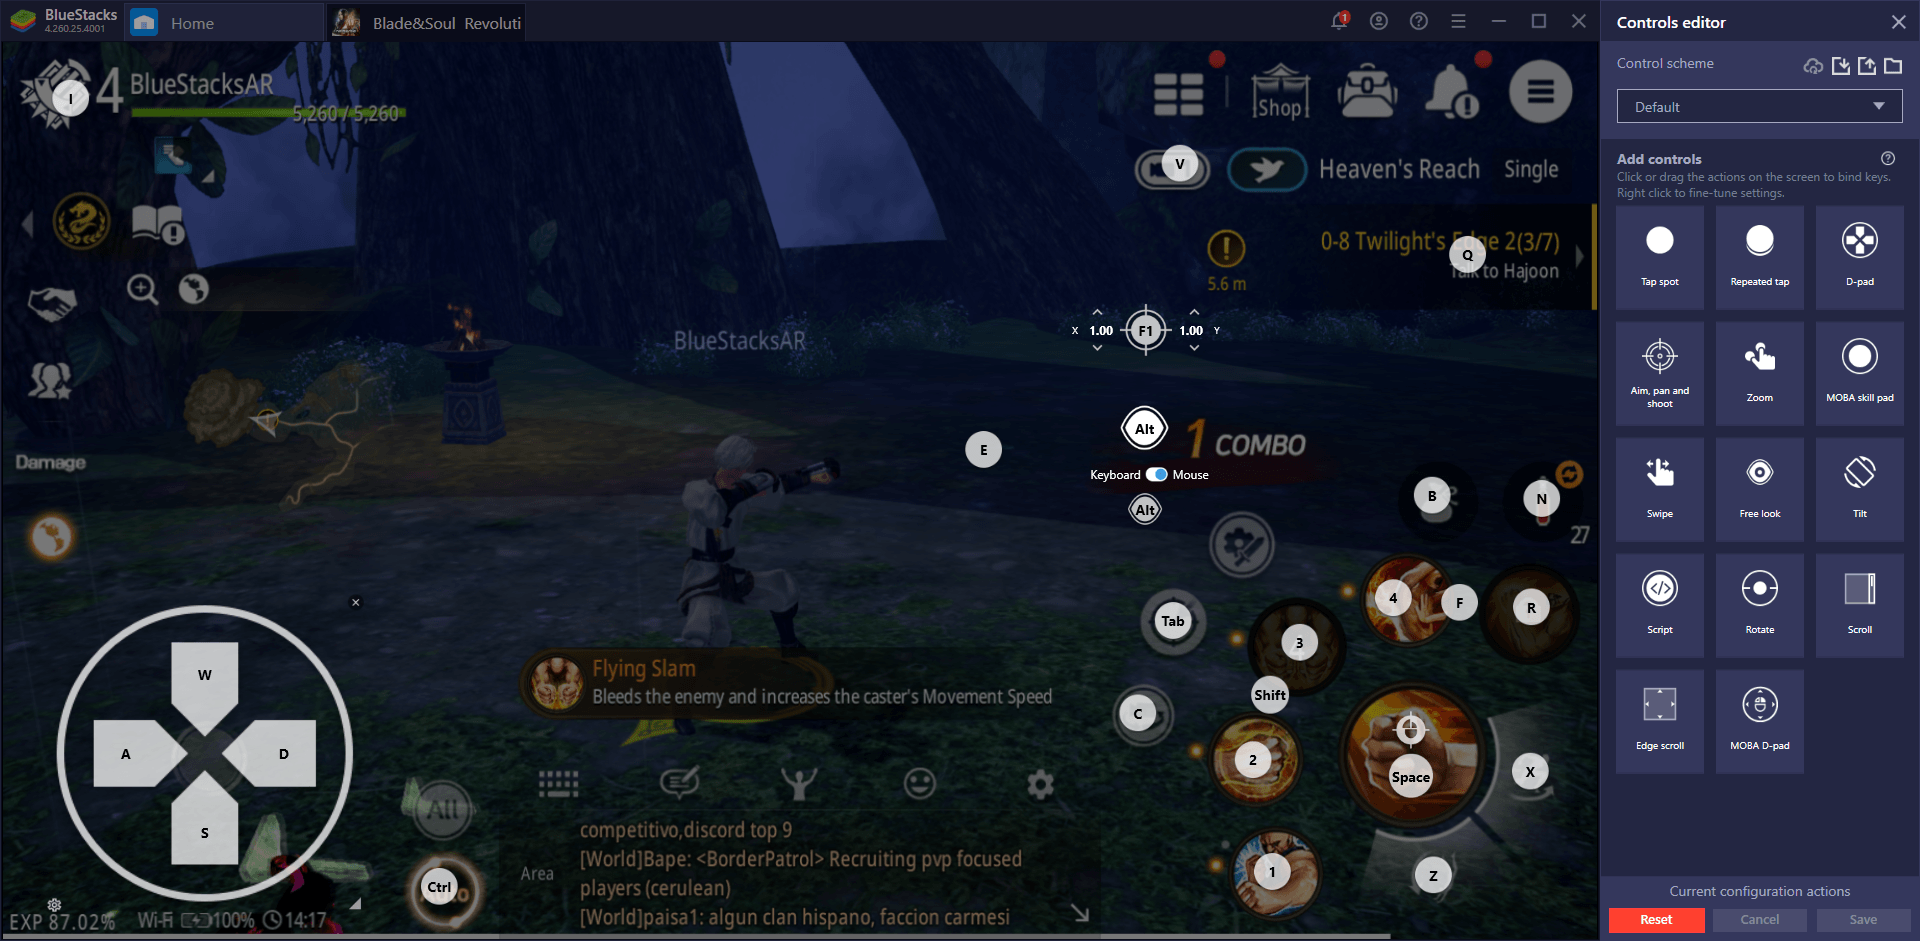 Blade & Soul Revolution on PC - How to Get the Most Out of Your Game When Playing on BlueStacks